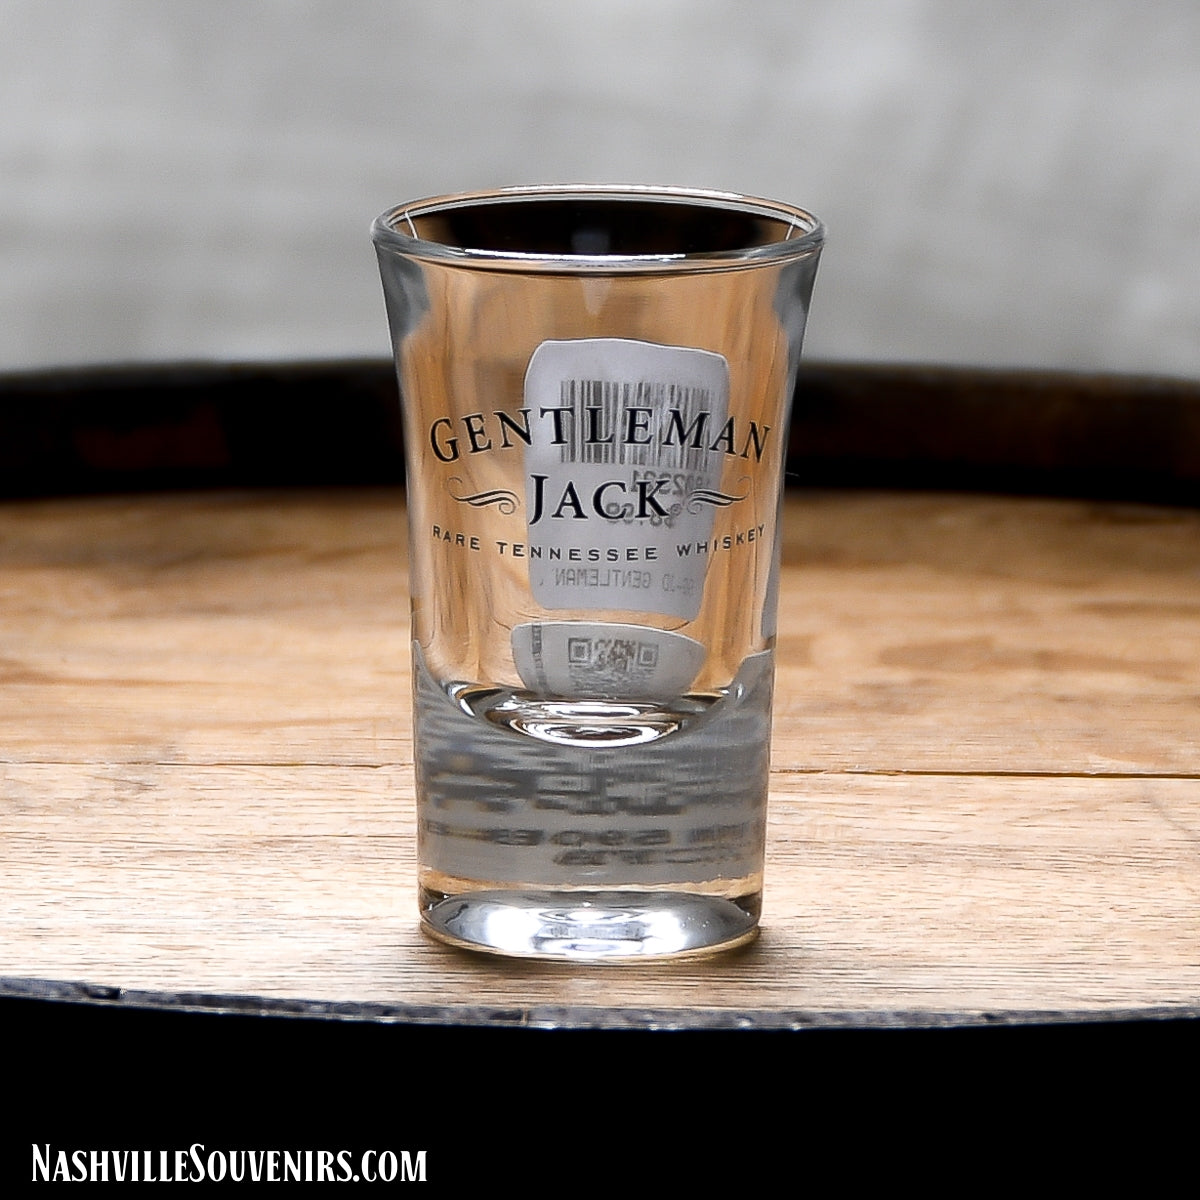 Officially licensed Jack Daniels Gentlemen Jack Shot Glass. FREE SHIPPING on all US orders over $75!